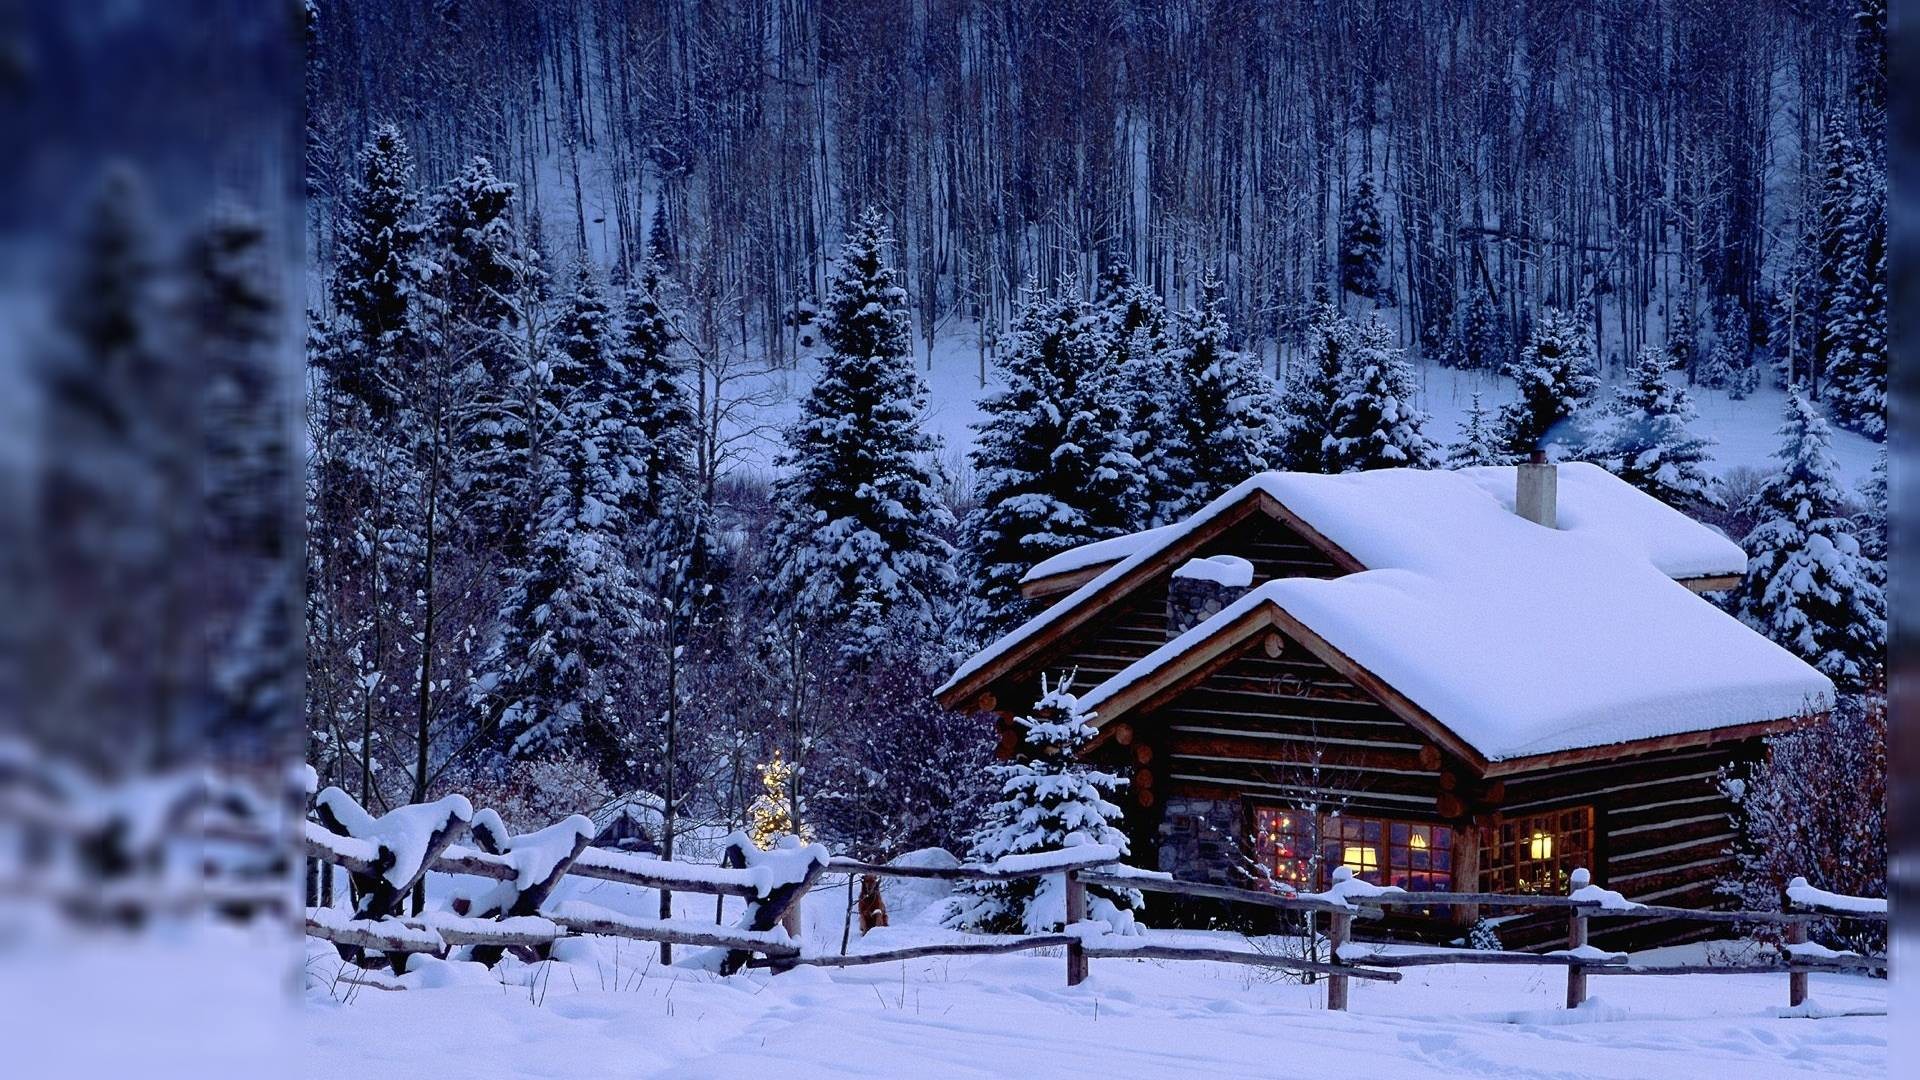 1920x1080 Holiday Themed Background Winter Theme Desktop Hd Wallpapers Xpx